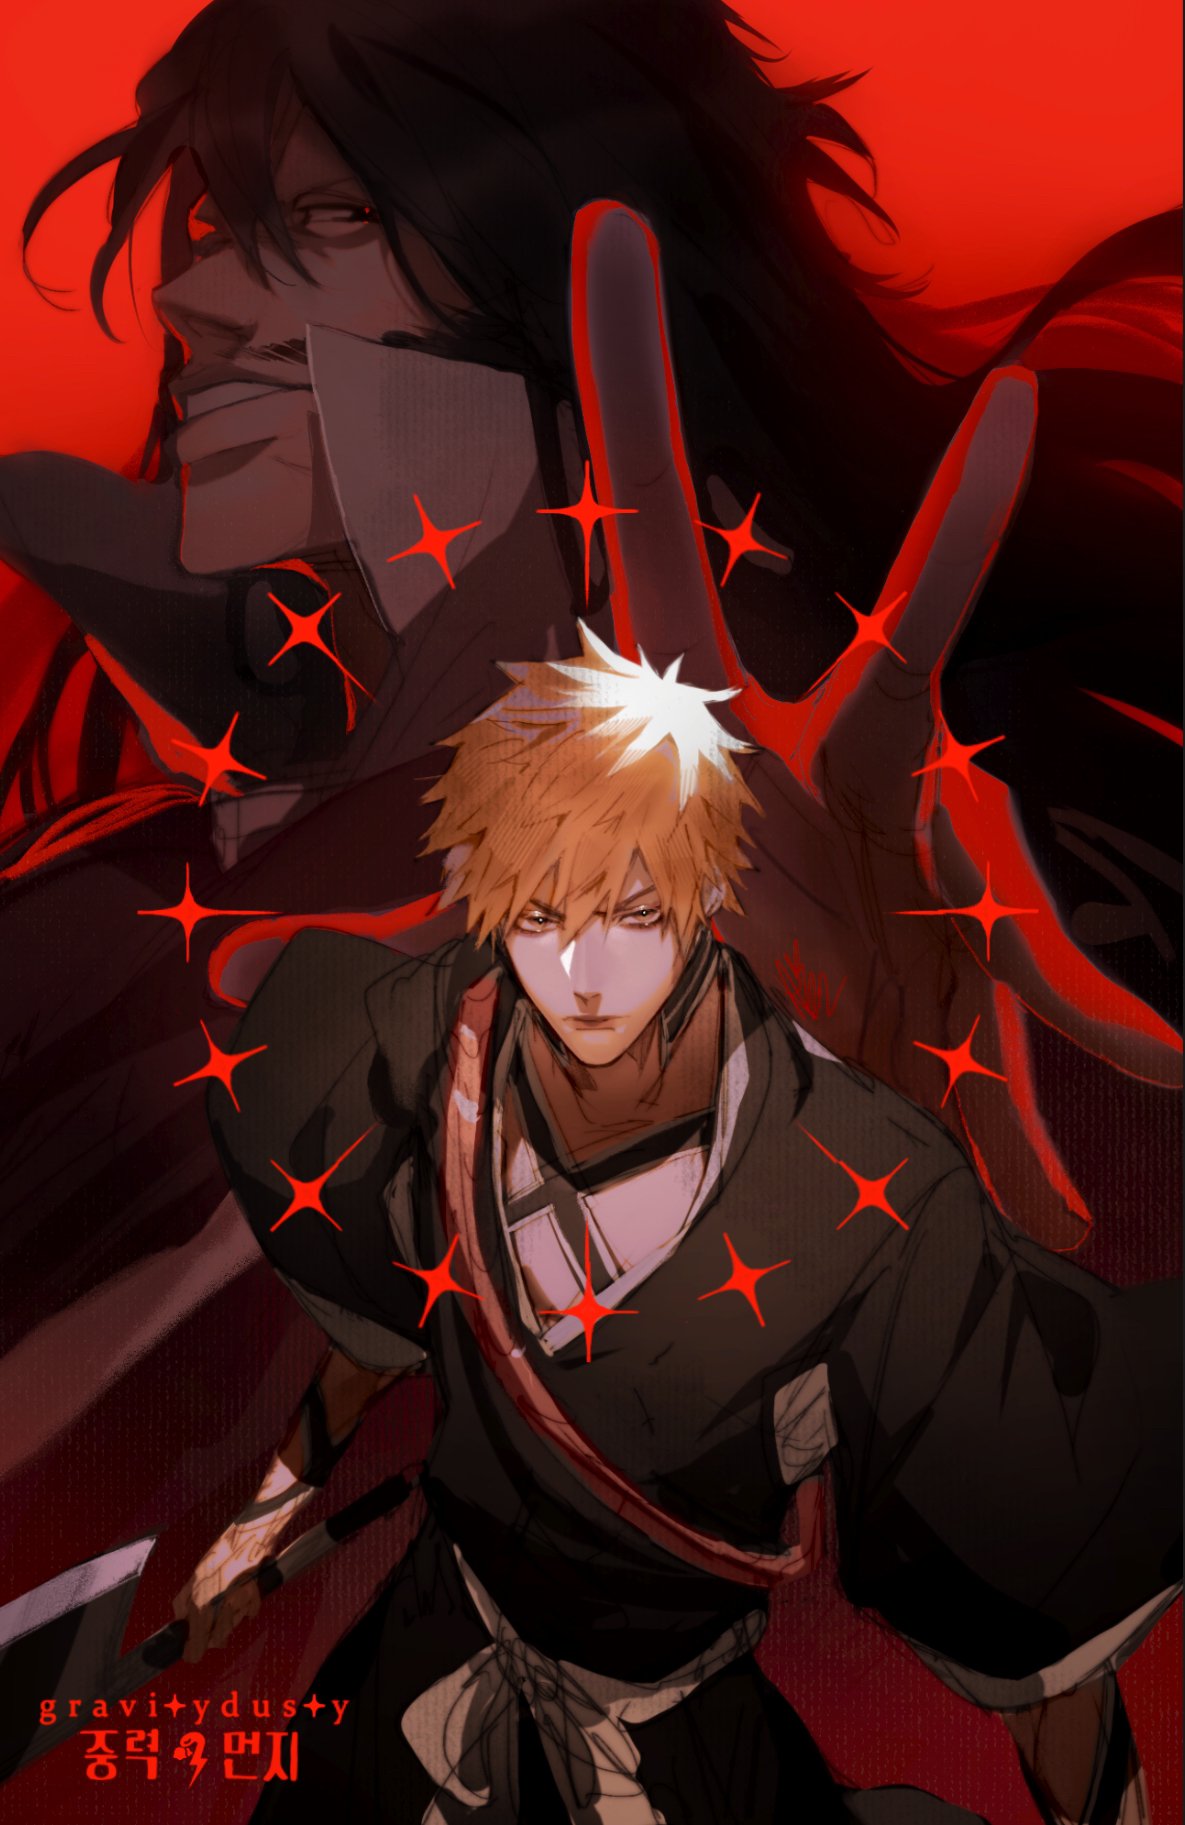 2boys artist_name black_hair black_kimono bleach cowboy_shot facial_hair gravitydusty hair_between_eyes highres holding holding_sword holding_weapon japanese_clothes kimono kurosaki_ichigo long_hair looking_at_viewer male_focus multiple_boys mustache orange_eyes orange_hair outstretched_hand parted_lips popped_collar red_background short_hair spiked_hair sword upper_body weapon wide_sleeves yhwach